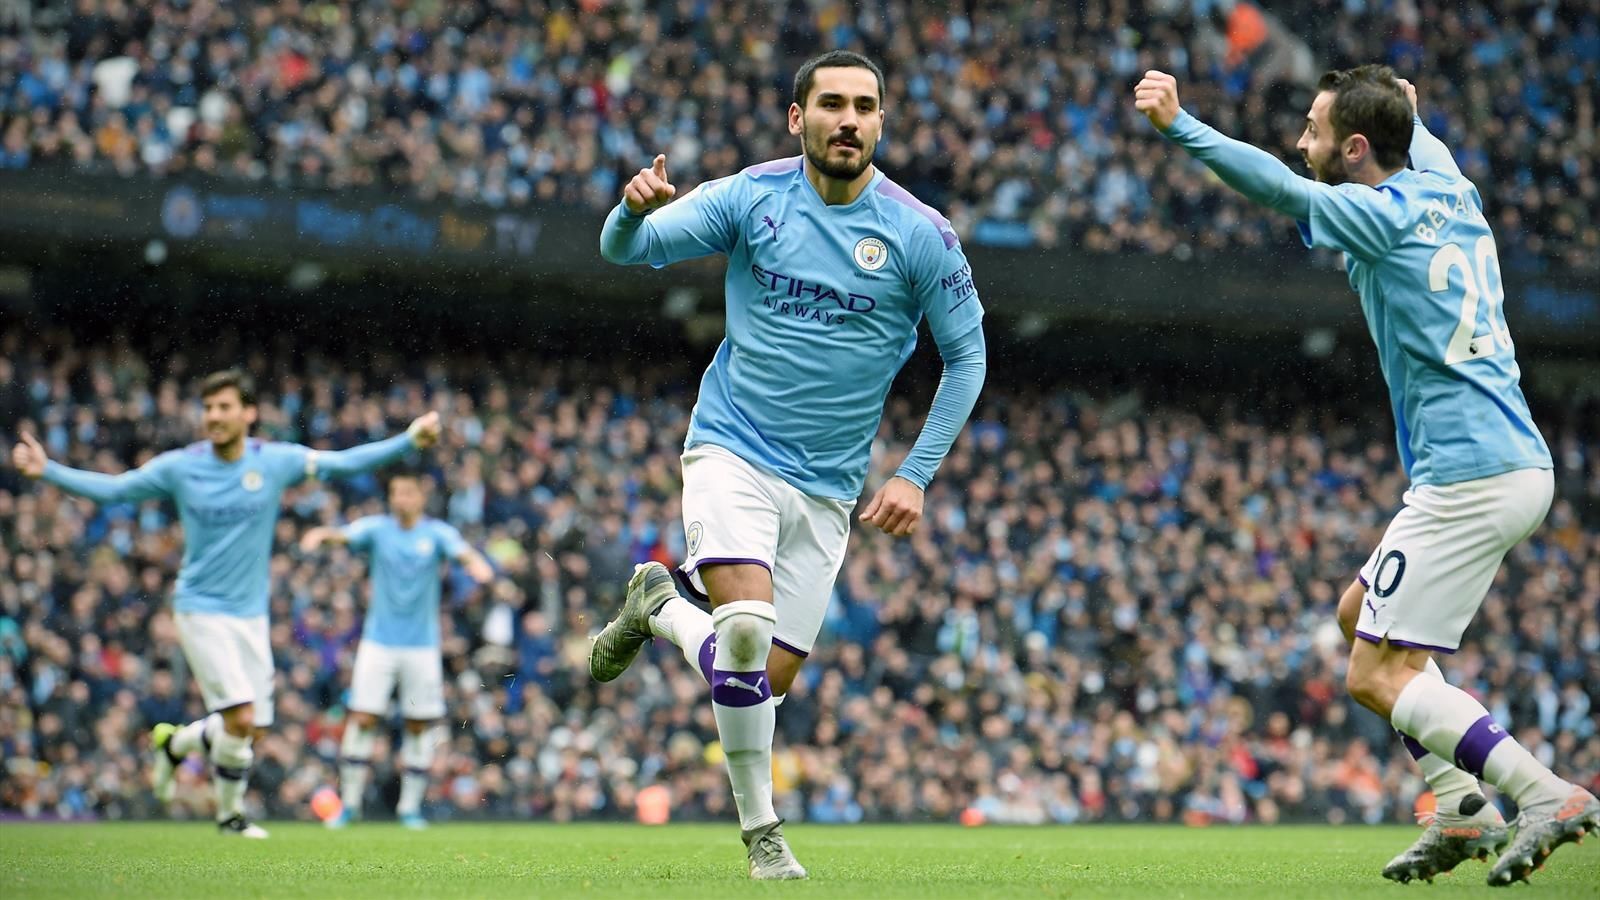 Gundogan Would Like to Play on the Same Squad as Ronaldo and Messi